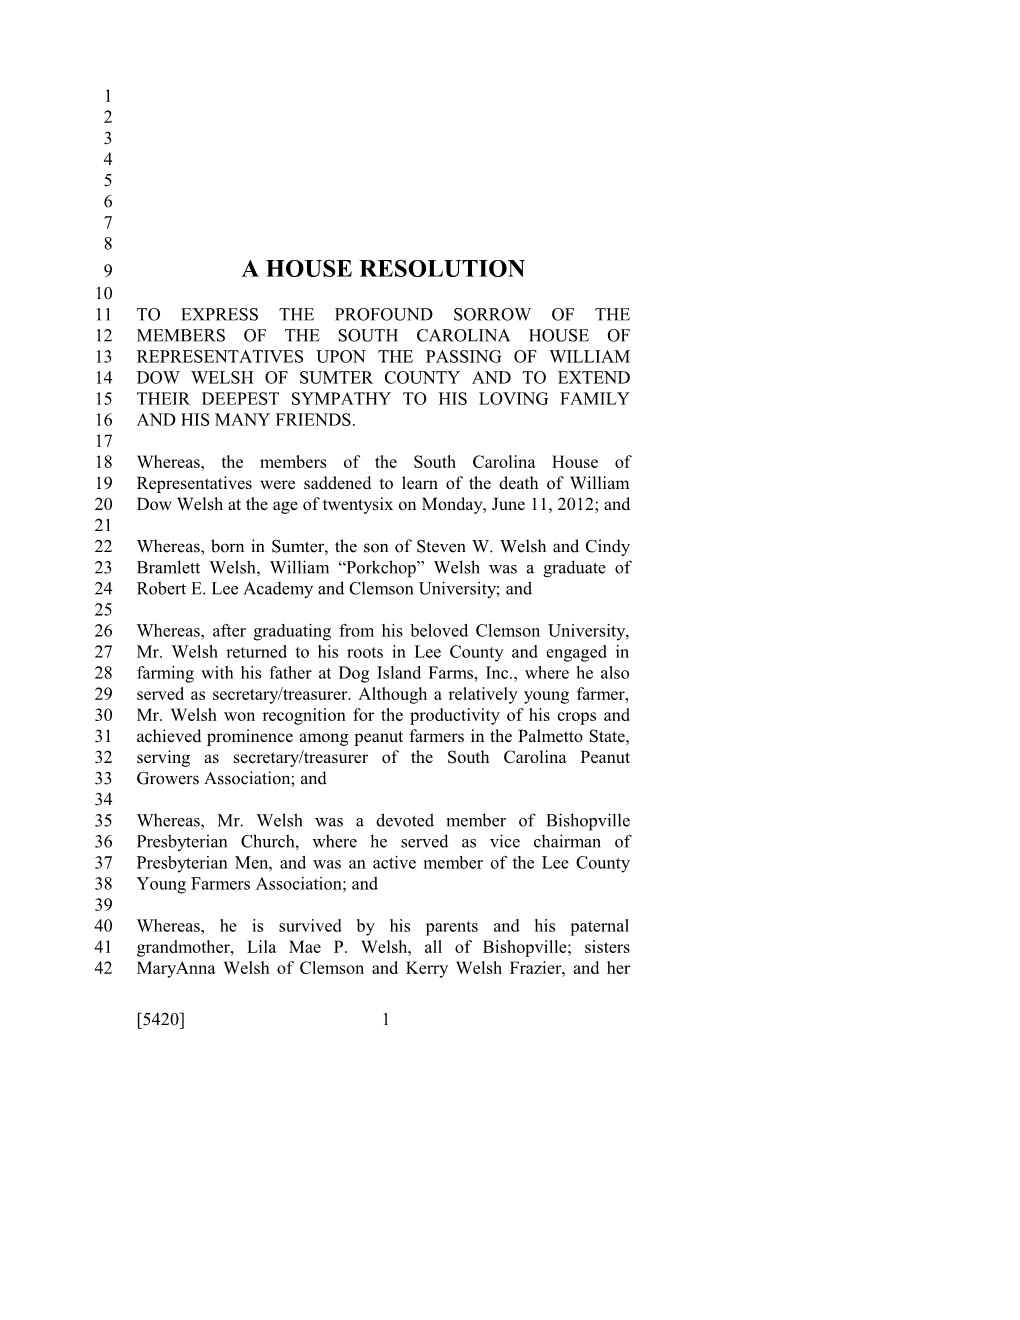 A House Resolution s10